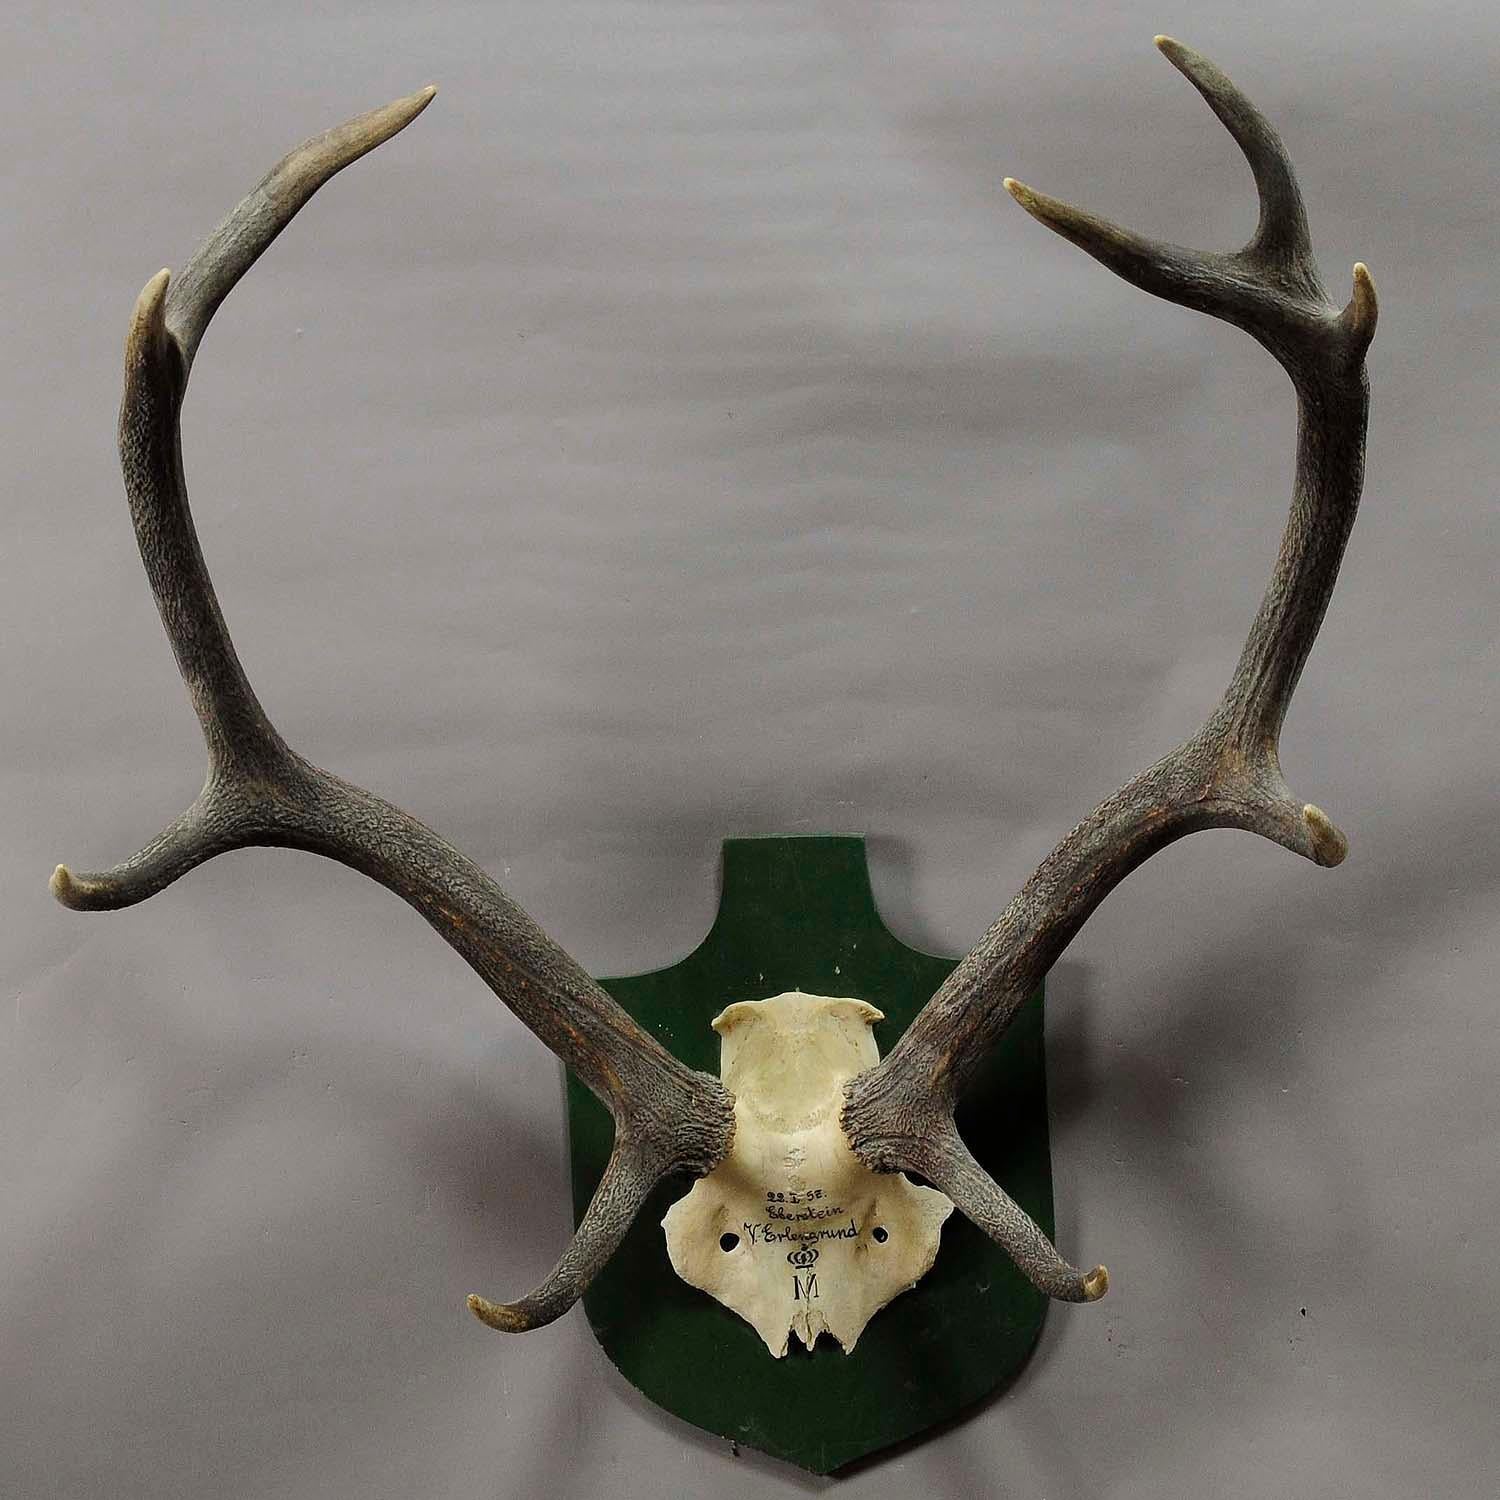 A great uneven 10 pointer Black Forest deer trophy from the palace of Salem in south Germany. Shoot by a member of the lordly family of Badenin 1957. Handwritten inscriptions on the skull with, place of the hunt and date 1957. Mounted on a wooden